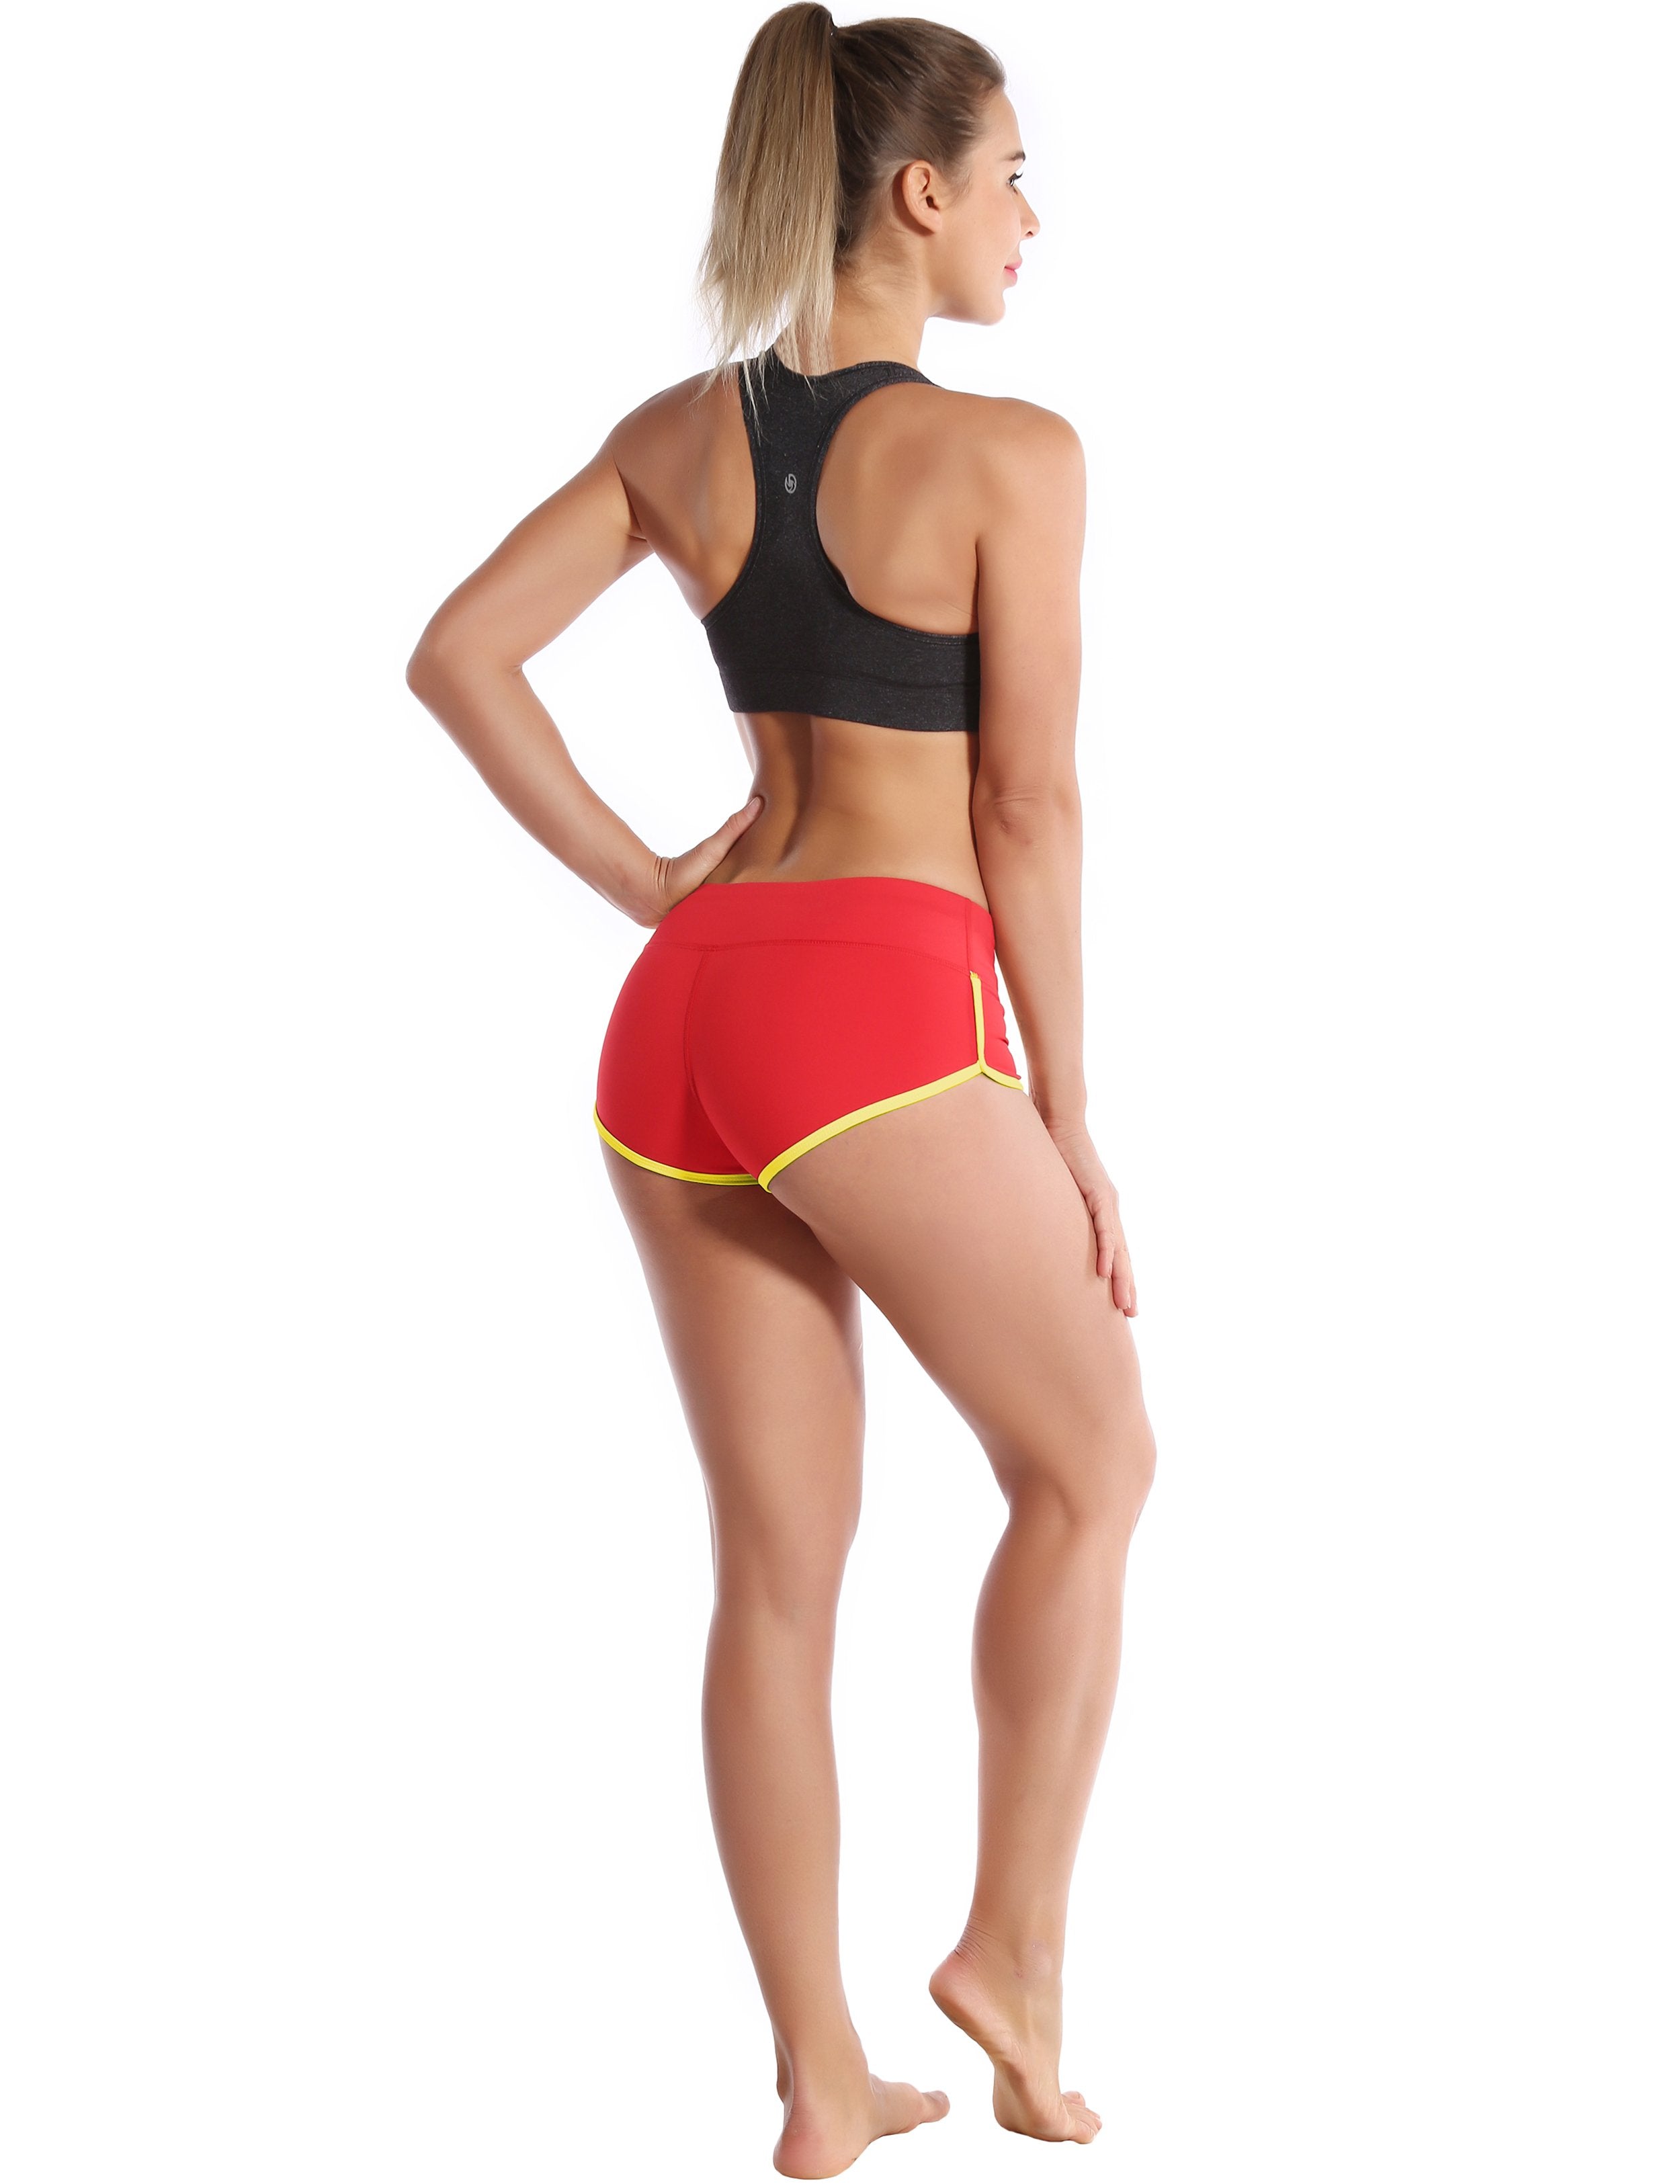 Sexy Booty Jogging Shorts scarlet_fluorescentyellow Sleek, soft, smooth and totally comfortable: our newest sexy style is here. Softest-ever fabric High elasticity High density 4-way stretch Fabric doesn't attract lint easily No see-through Moisture-wicking Machine wash 75%Nylon/25%Spandex